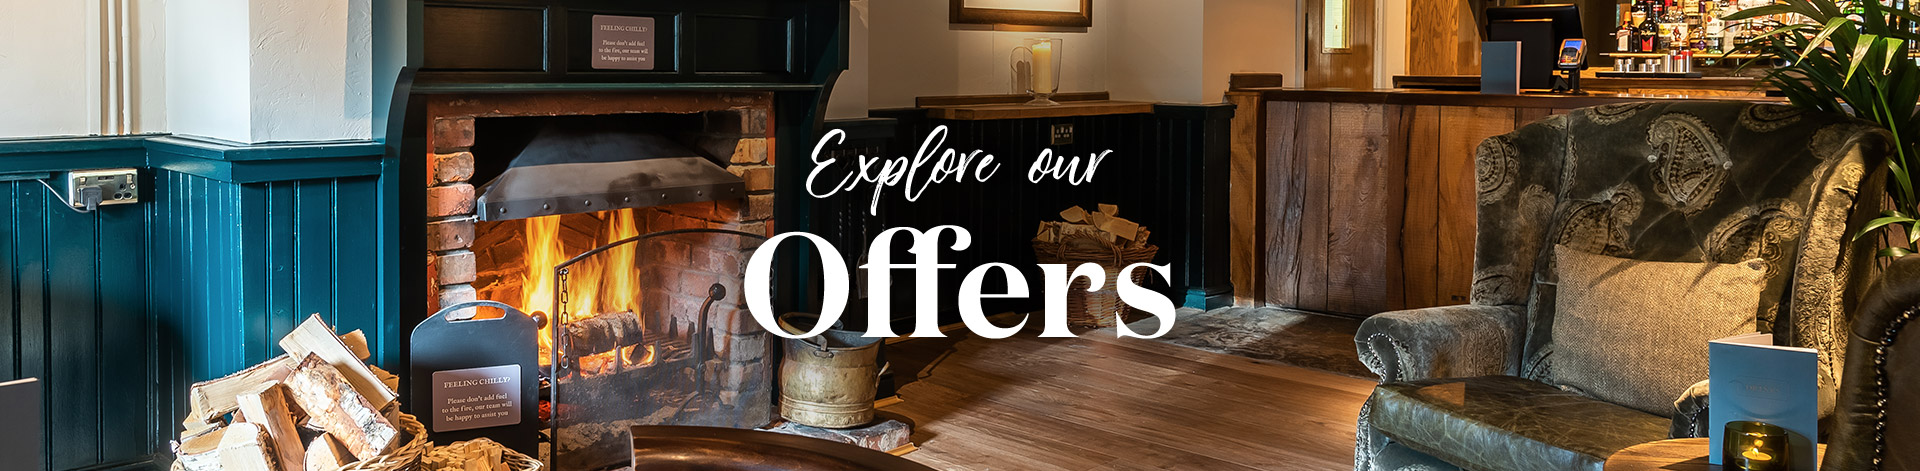 Our latest offers at The Crooked Chimney